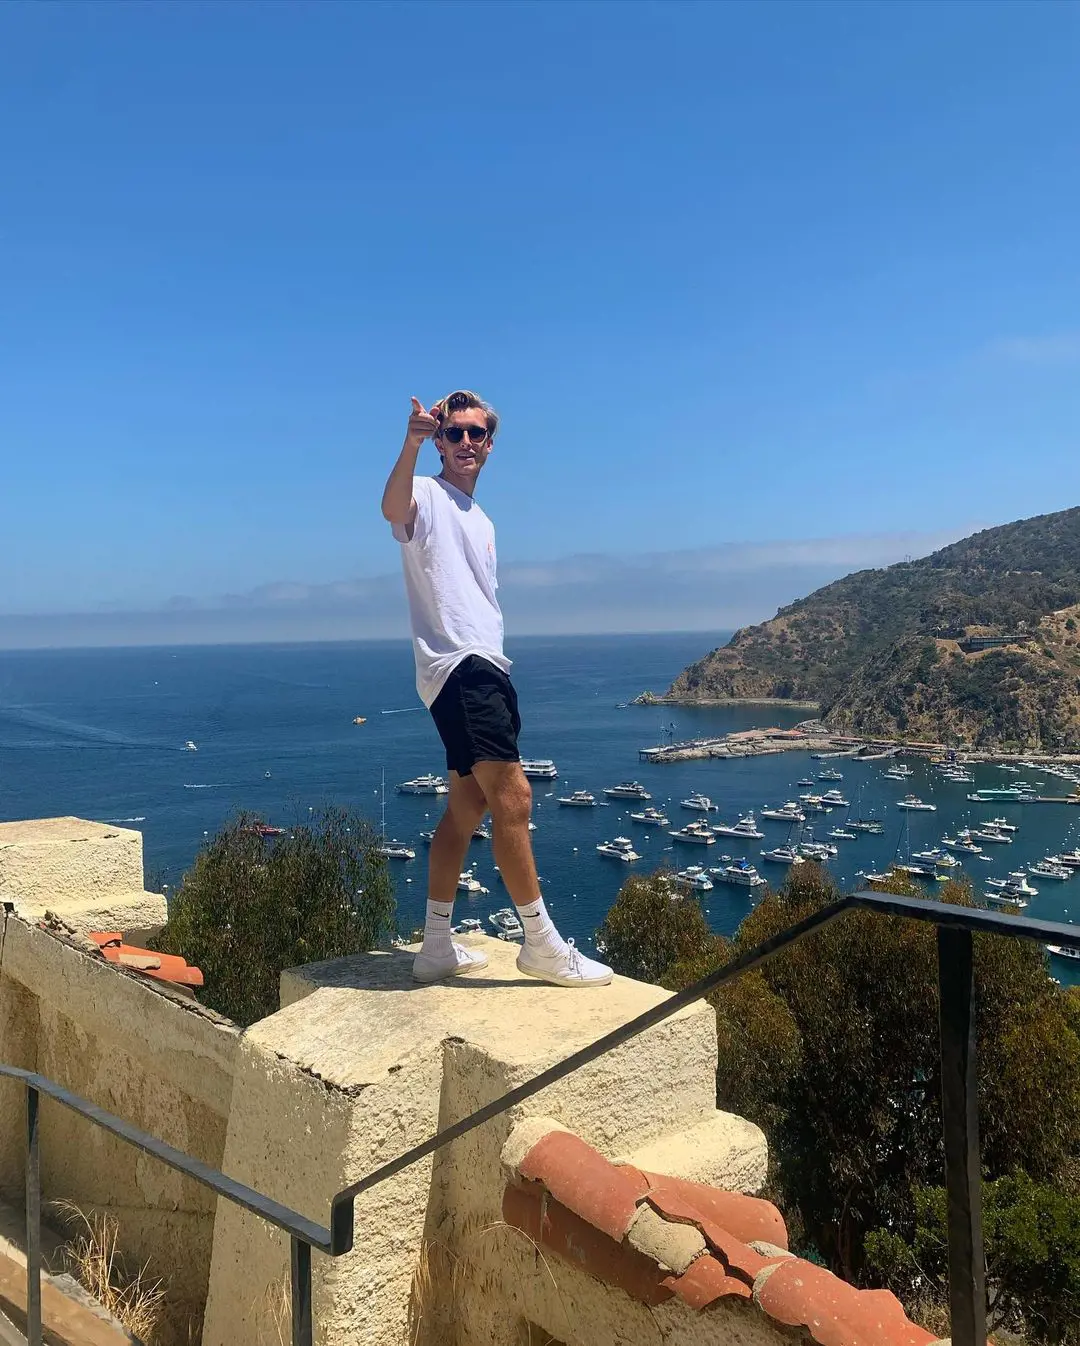 Troy posted his picture of himself from Catalina Island on 5 August 2020